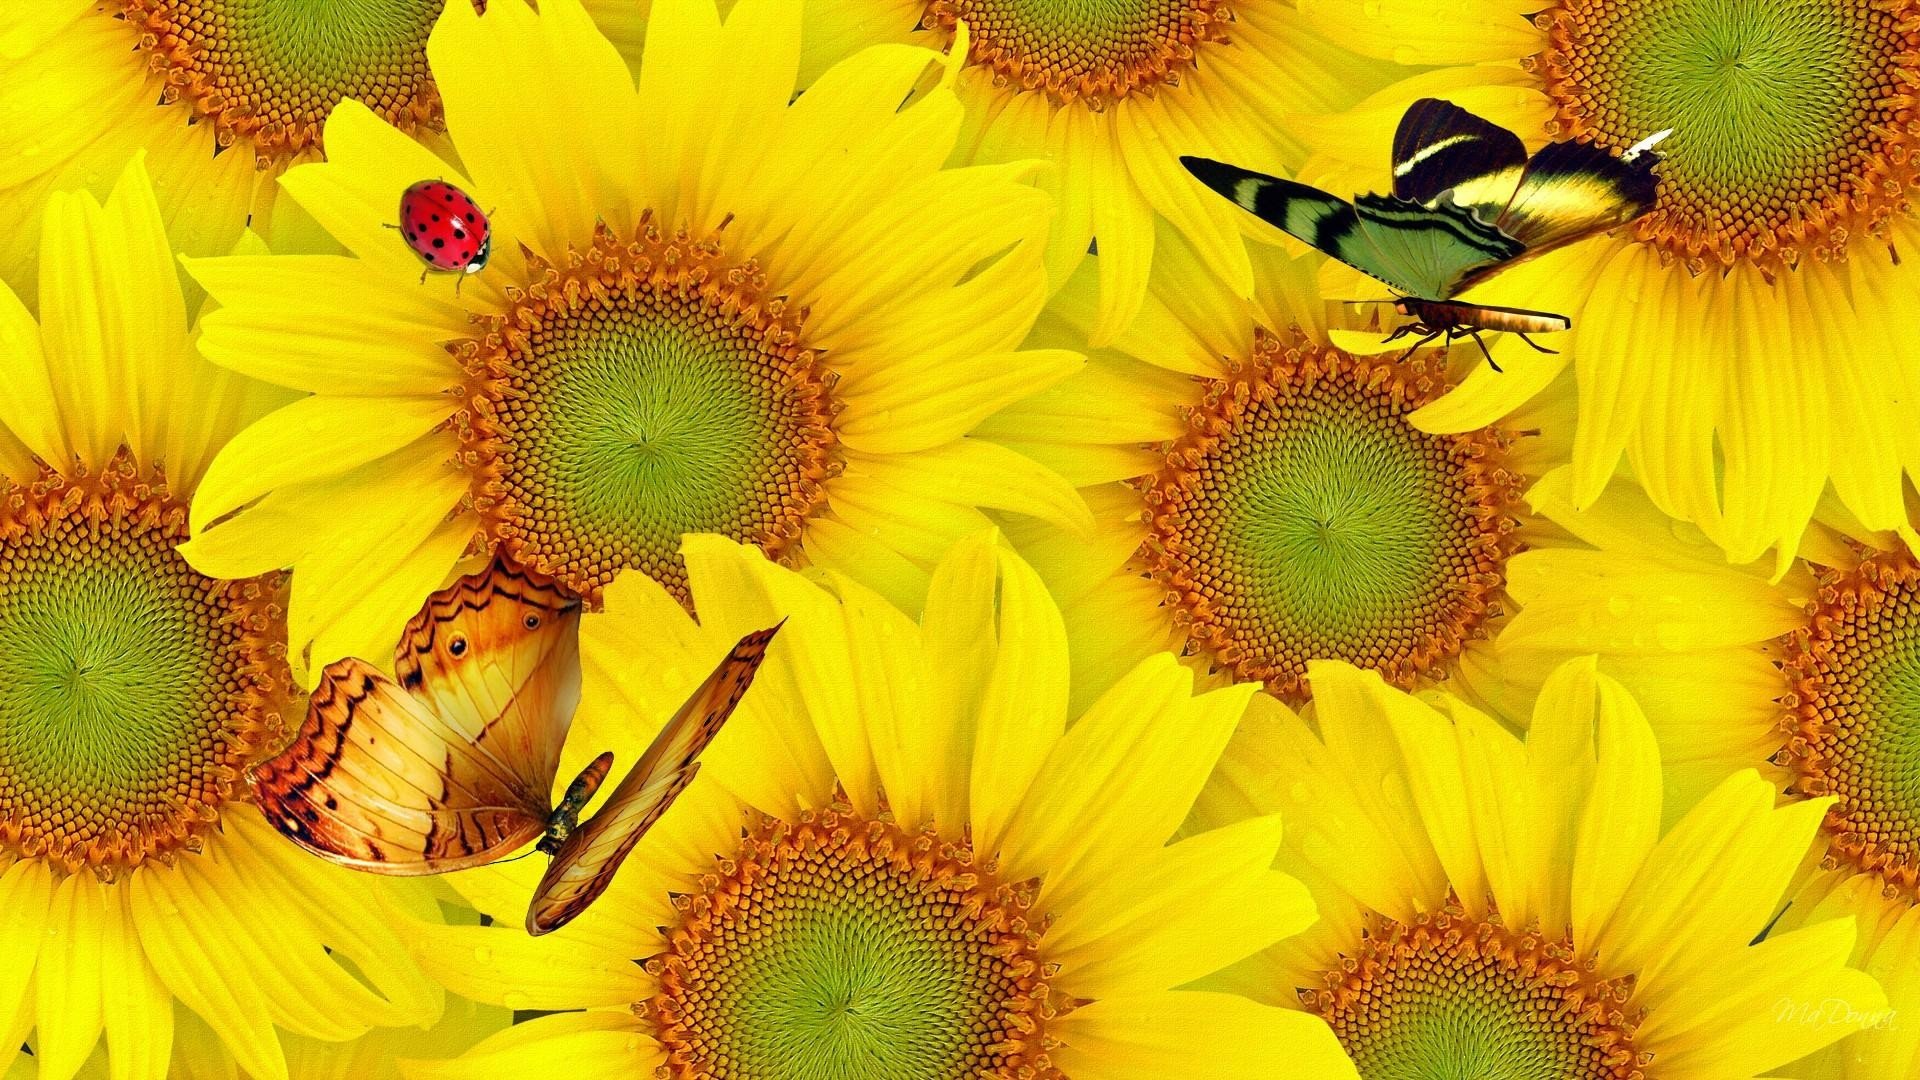 1920x1080 Sunflowers and Butterflies Wallpaper Background Image. 